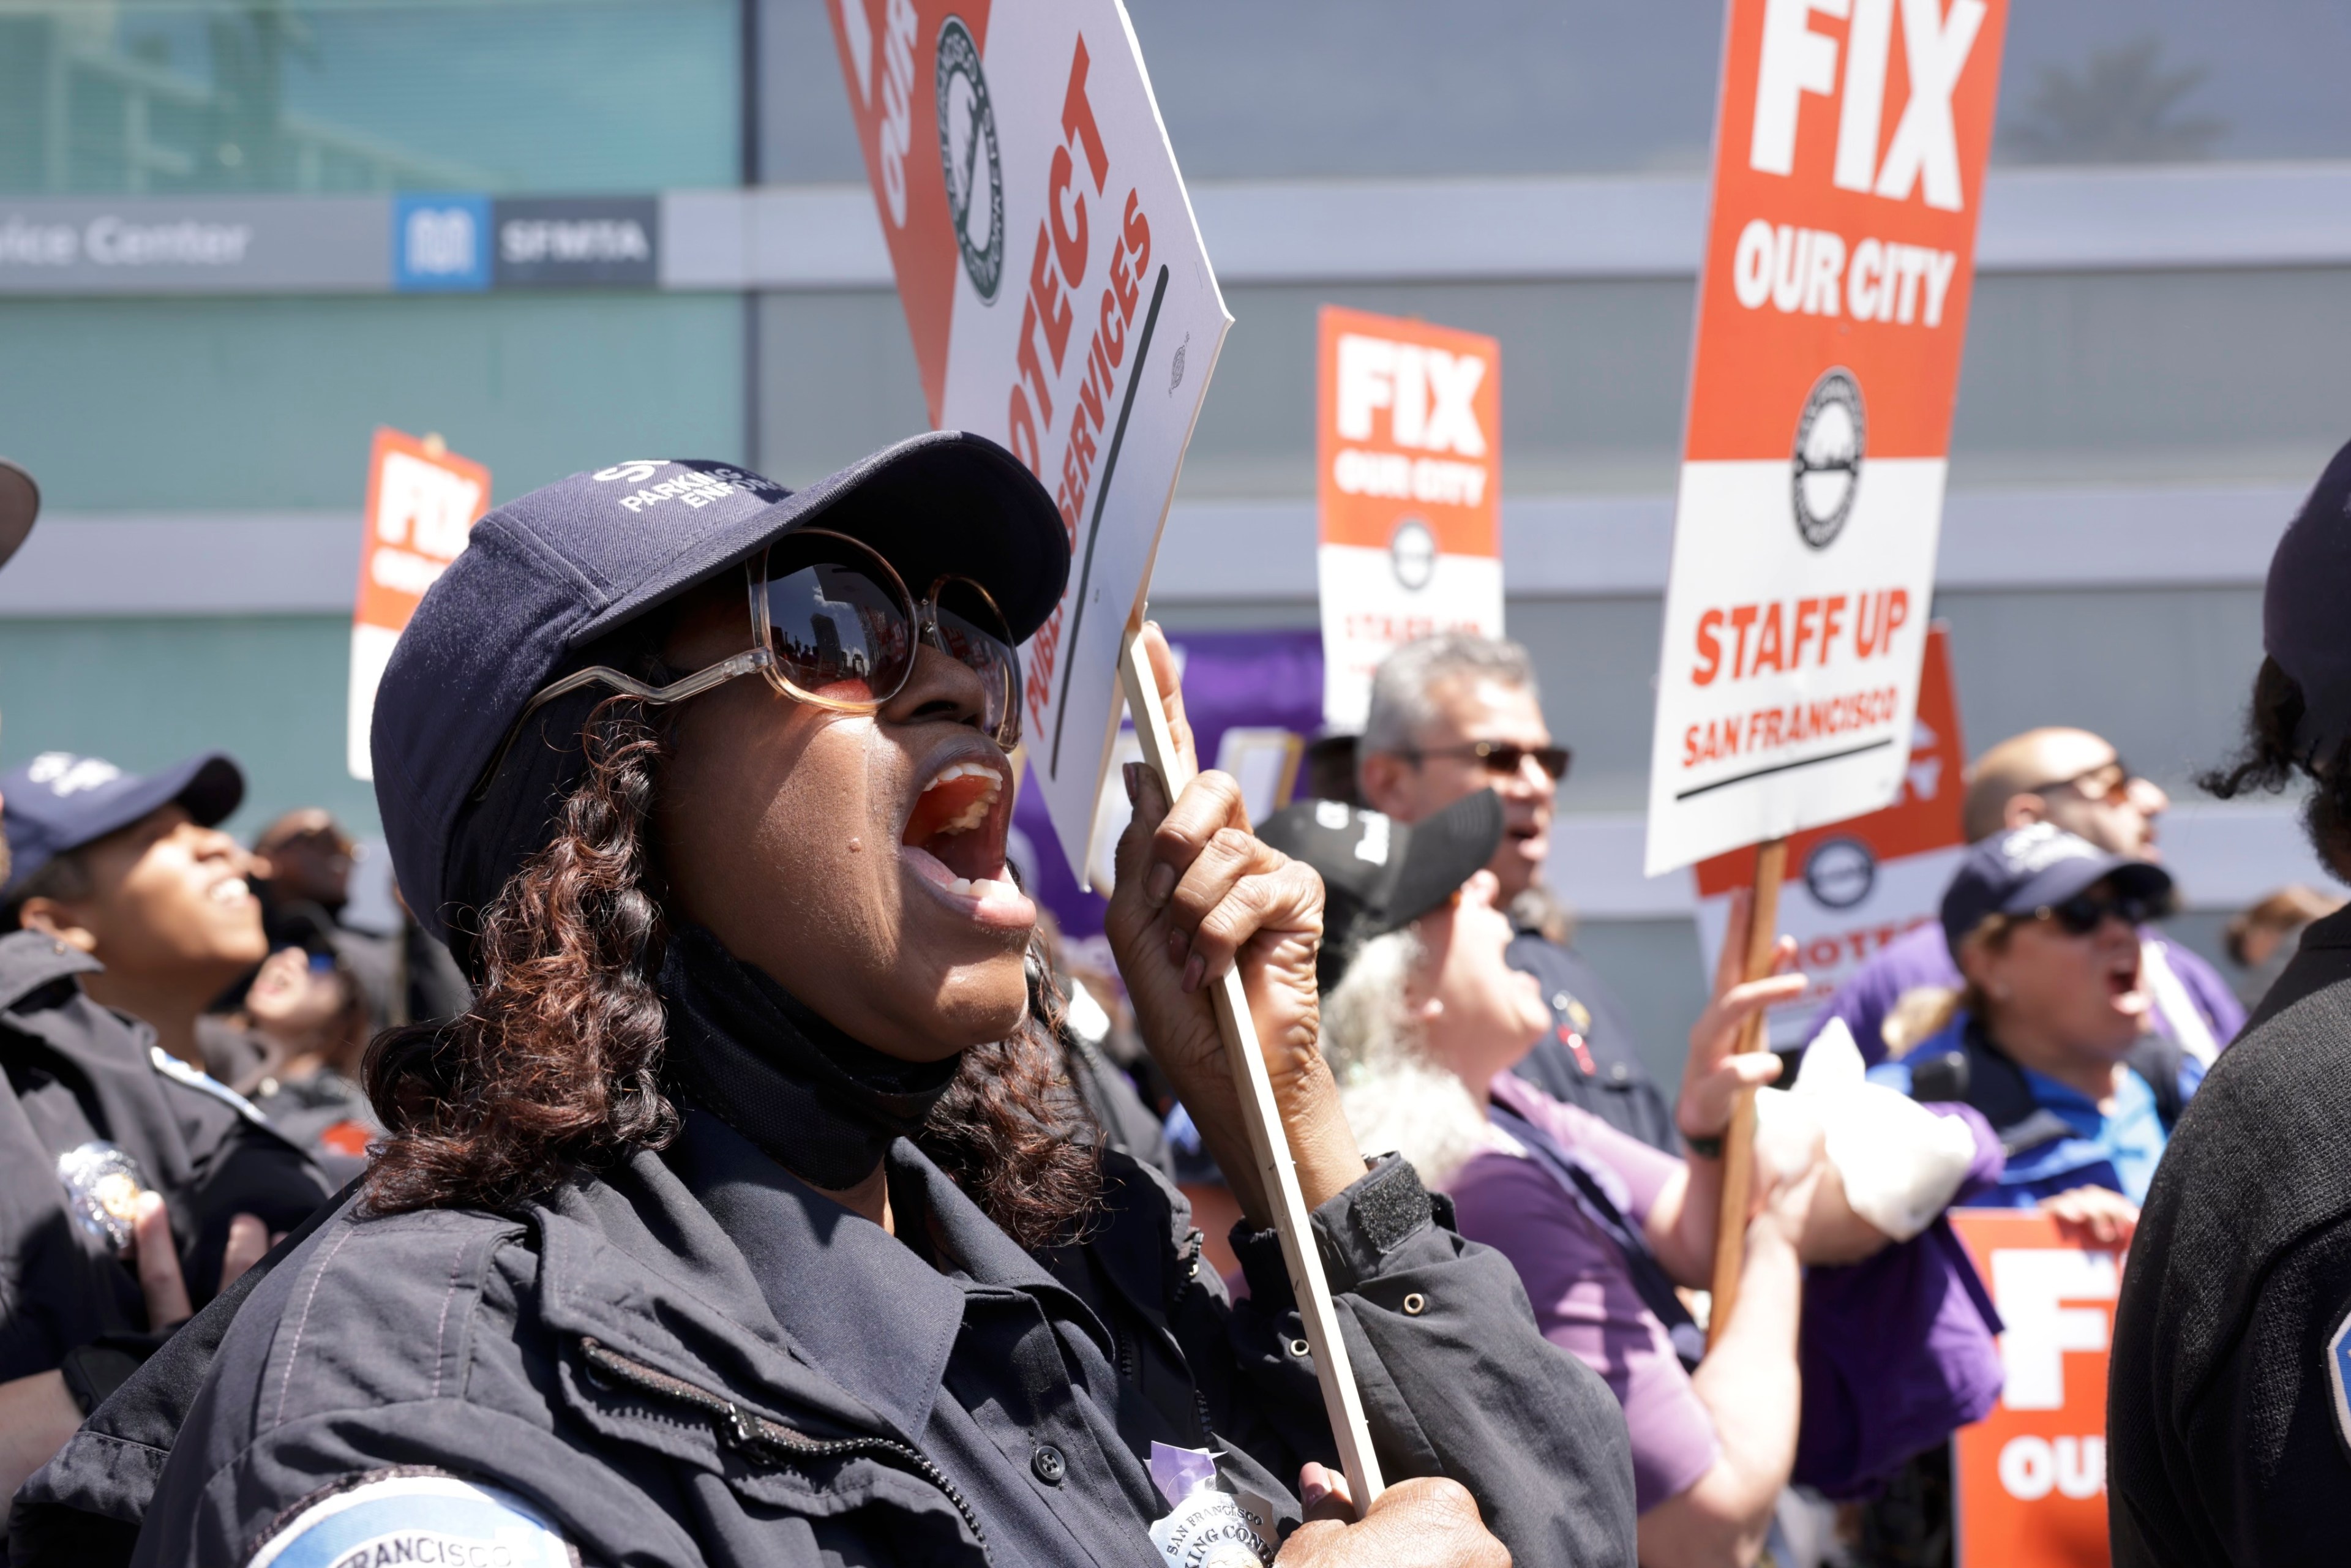 A group of people protesting, holding signs like "FIX OUR CITY." A woman in the foreground shouts, wearing sunglasses and a cap.